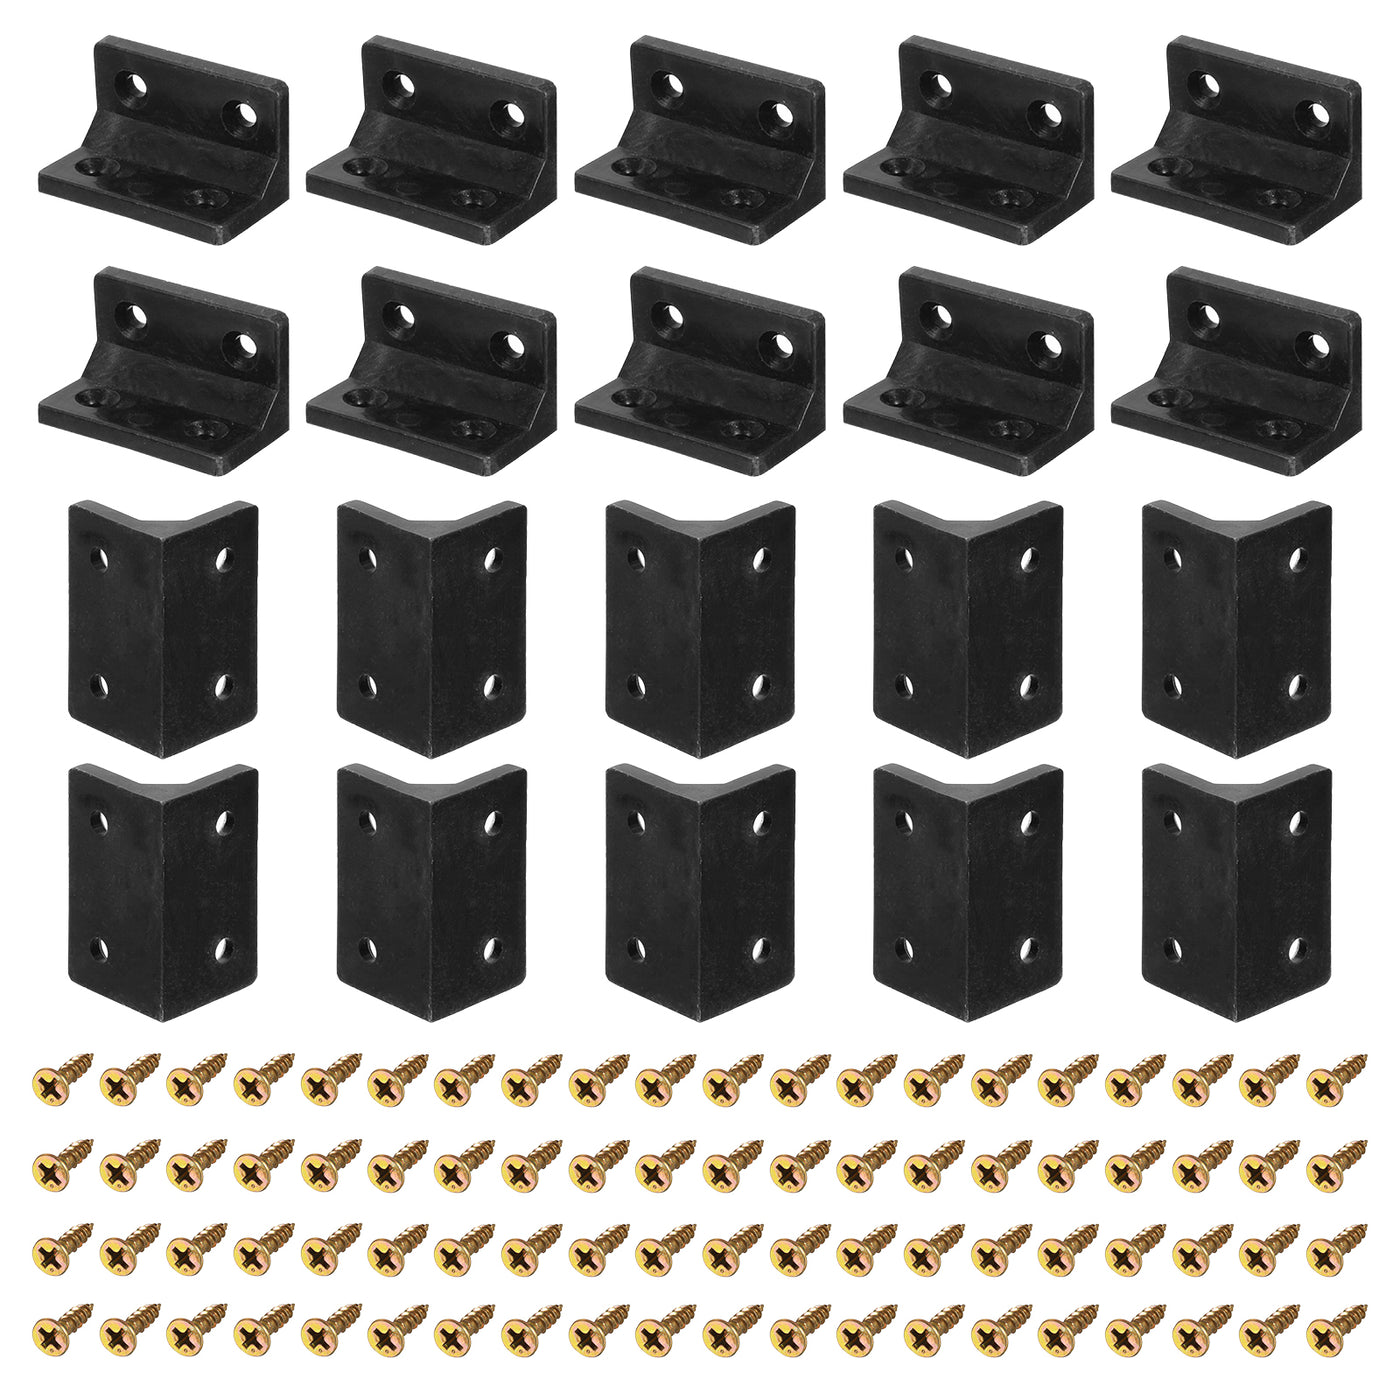 uxcell Uxcell 50Pcs 90 Degree Plastic Corner Braces, 38x22x22mm Nylon Shelf Right Angle Brackets with Screws for Cabinets, Cupboards (Black)